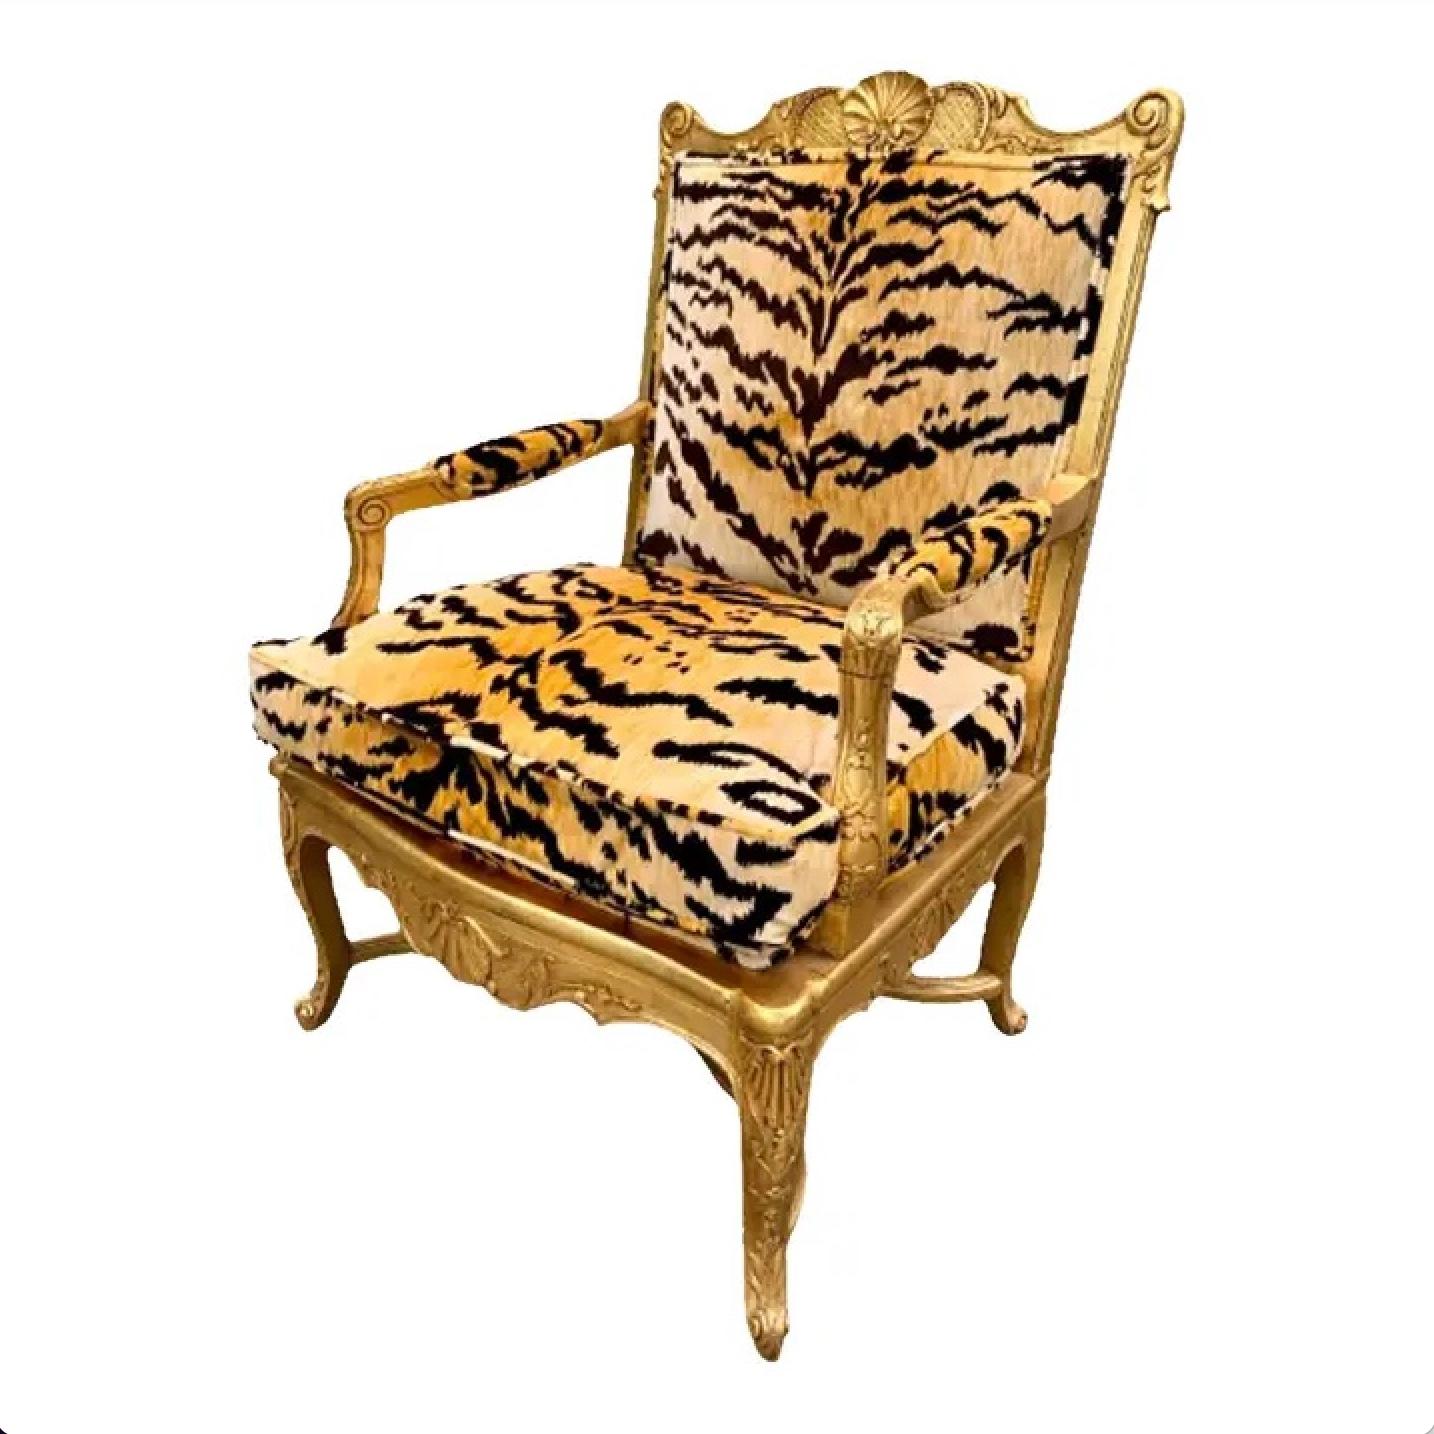 French Regency Giltwood Fauteuil Lounge Chair in Scalamandré Le Tigre Tiger Silk For Sale 6